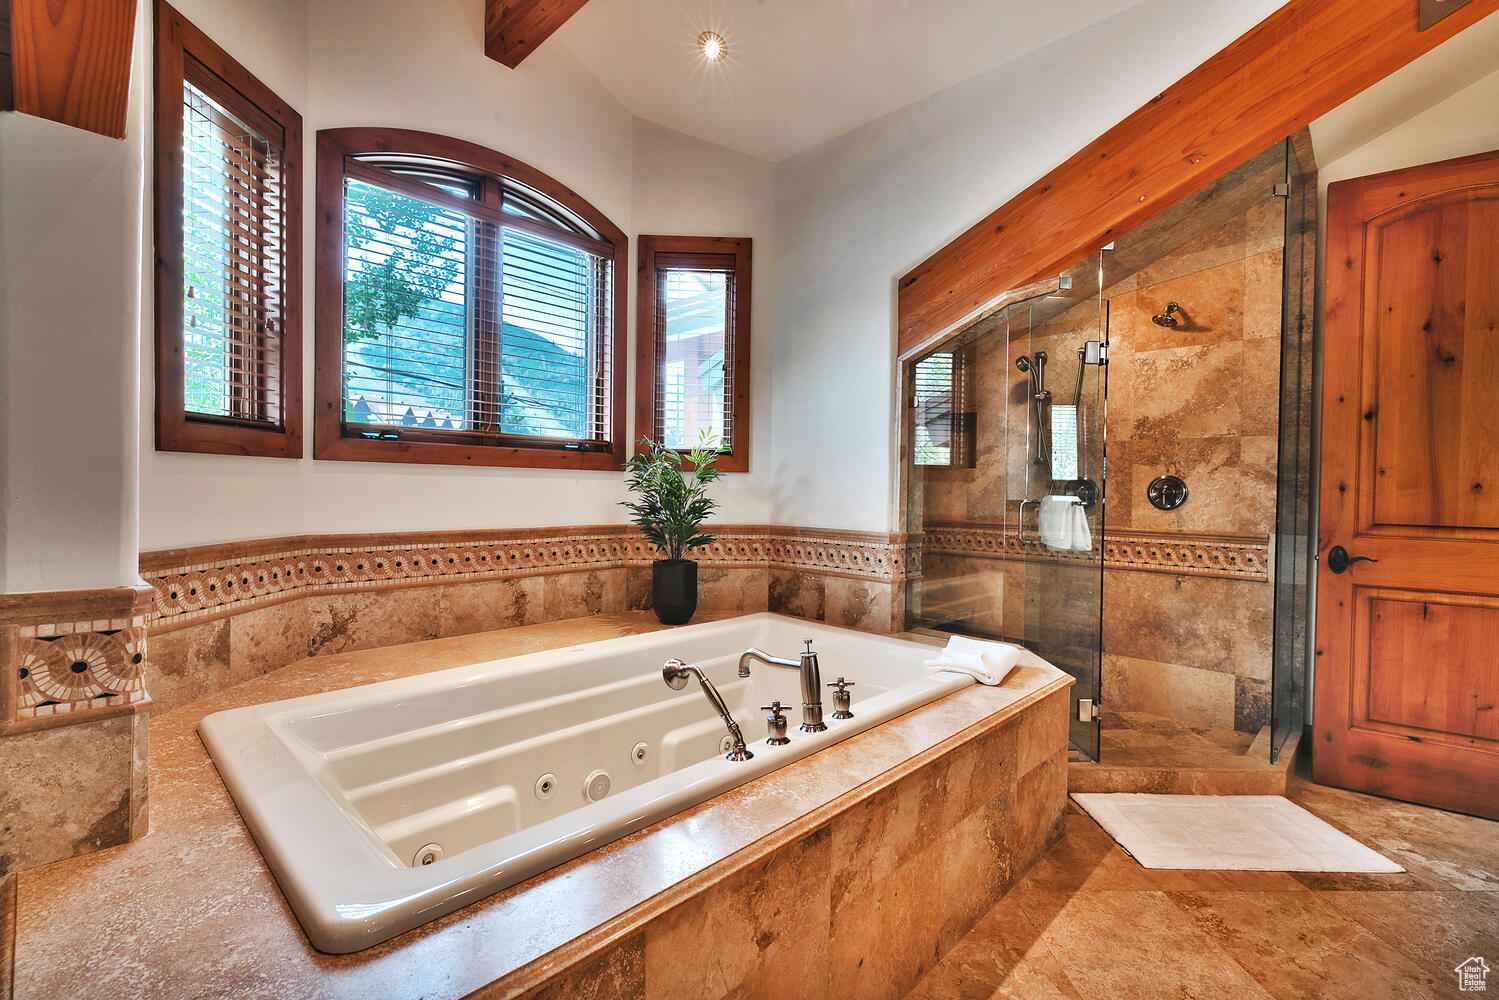 Bathroom with lofted ceiling with beams, tile floors, and separate shower and tub